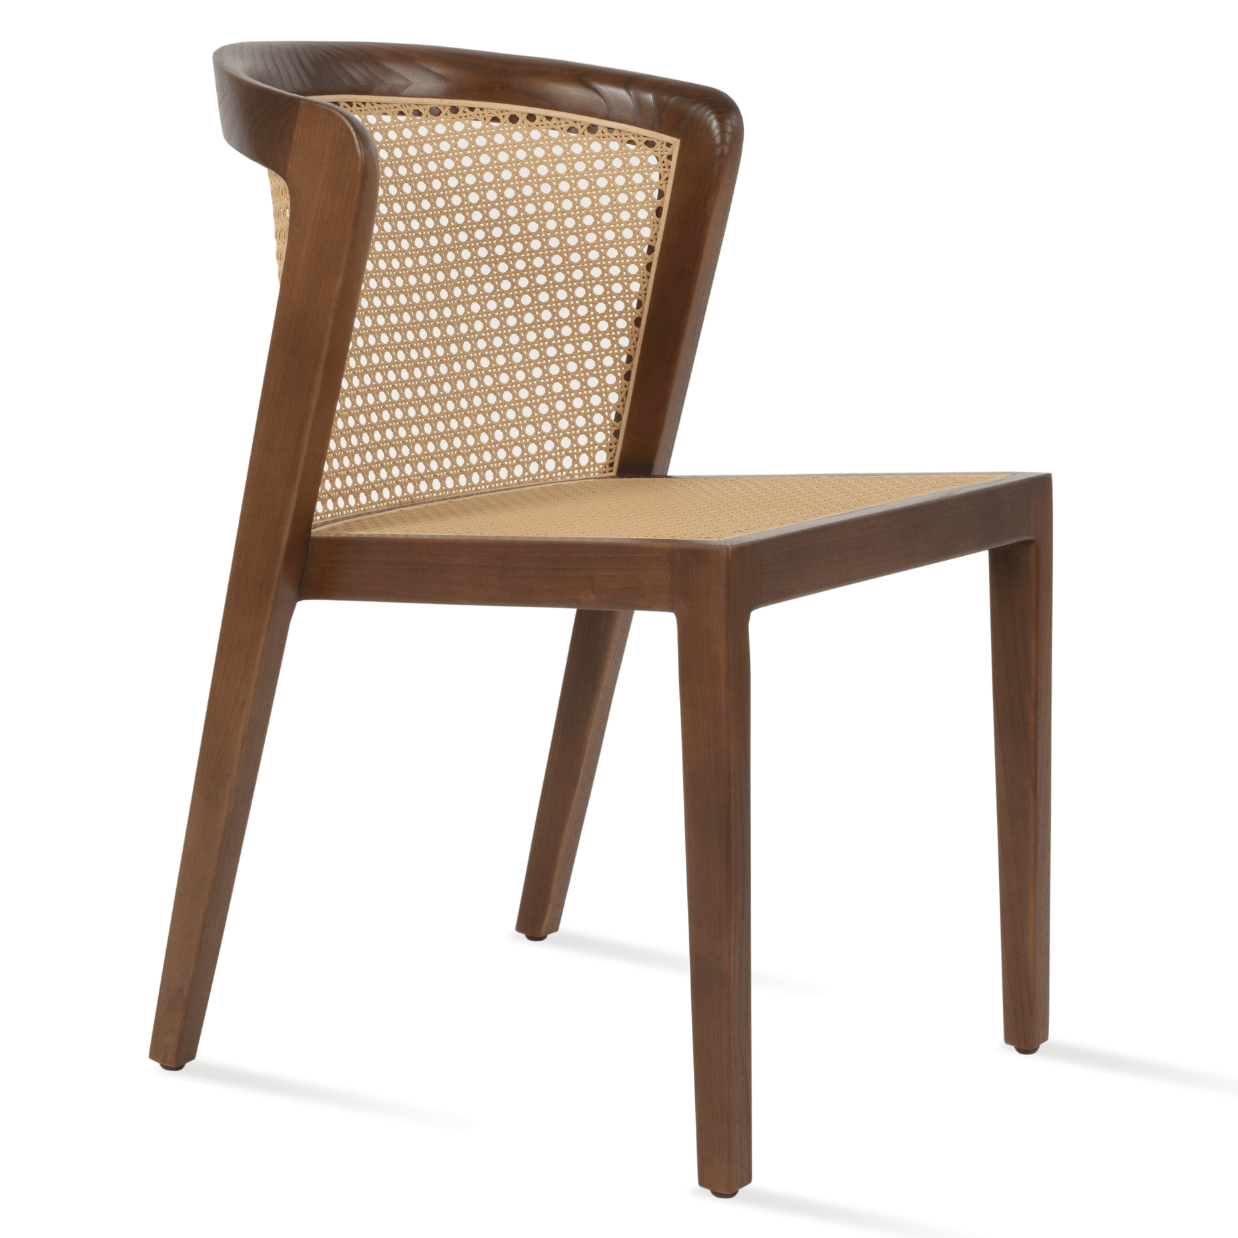 Caned Chair to Up Your Home Decor